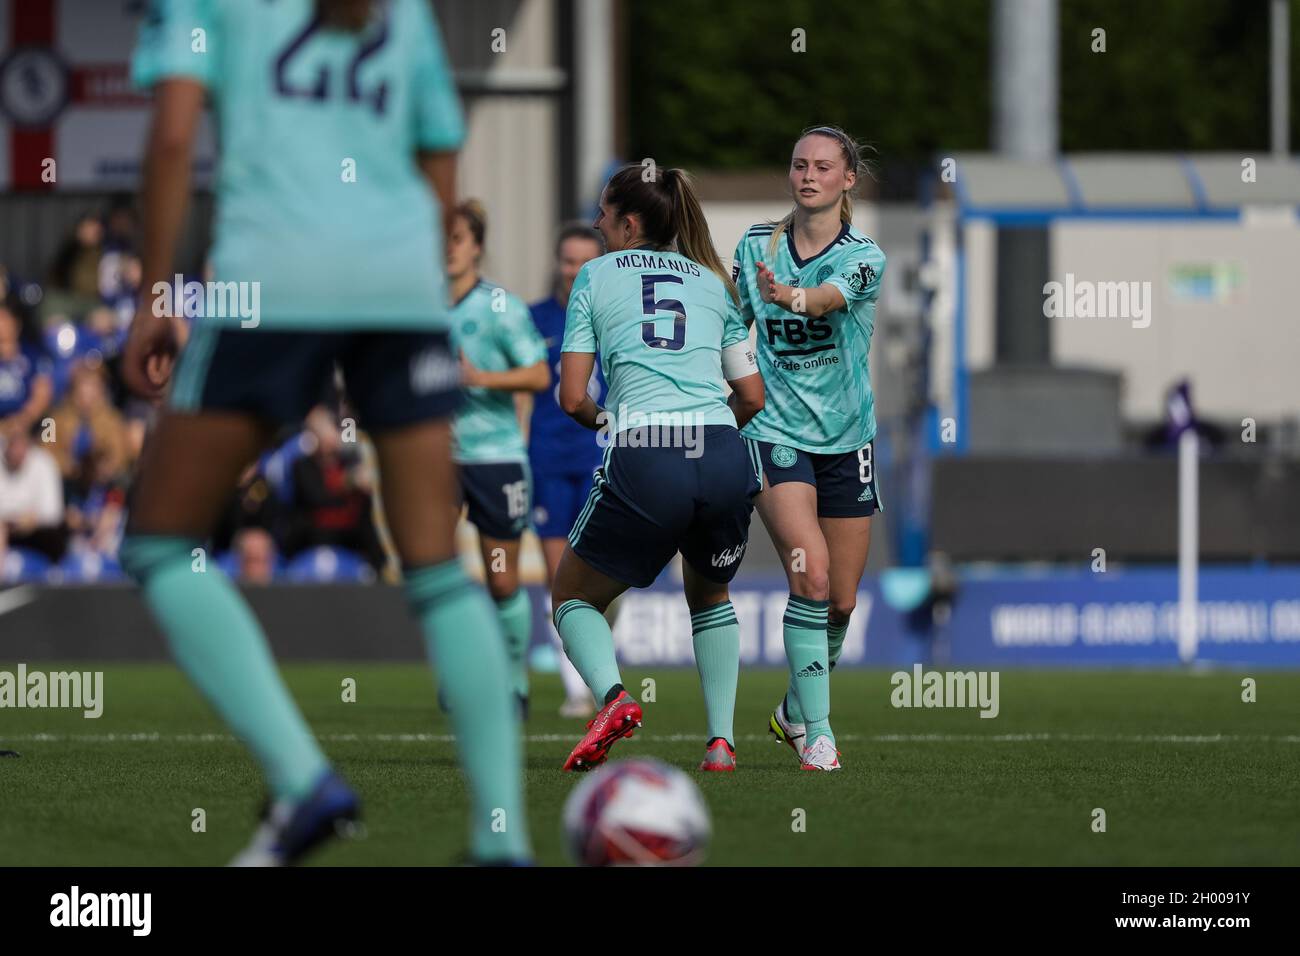 London, UK. 10th Oct, 2021. Barclays FA Womens Super League game between Chelsea and Leicester City at Kingsmeadow in London, England. Credit: SPP Sport Press Photo. /Alamy Live News Stock Photo